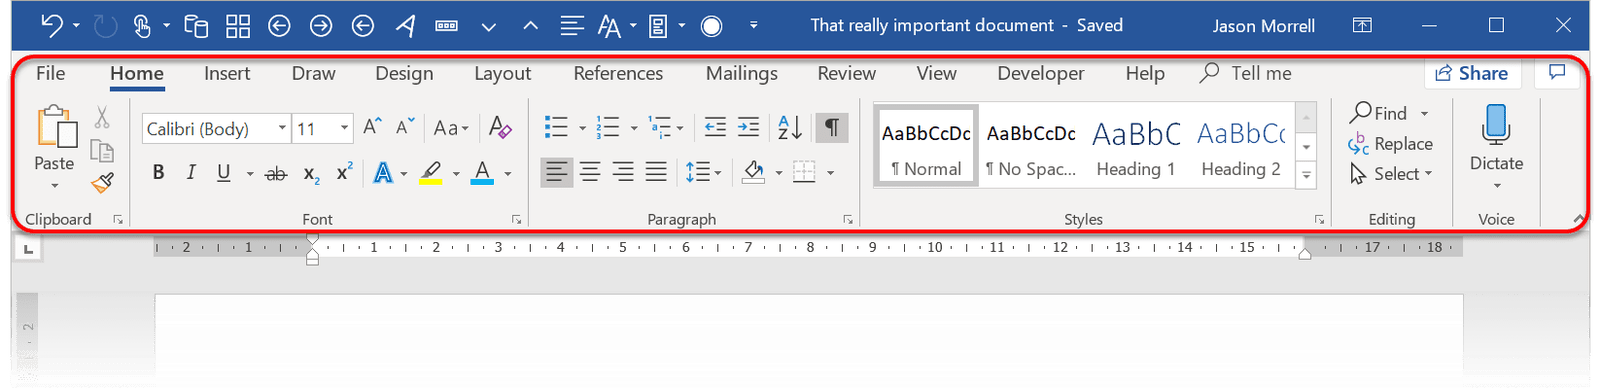 The 'Show Tabs and Commands' option in Word